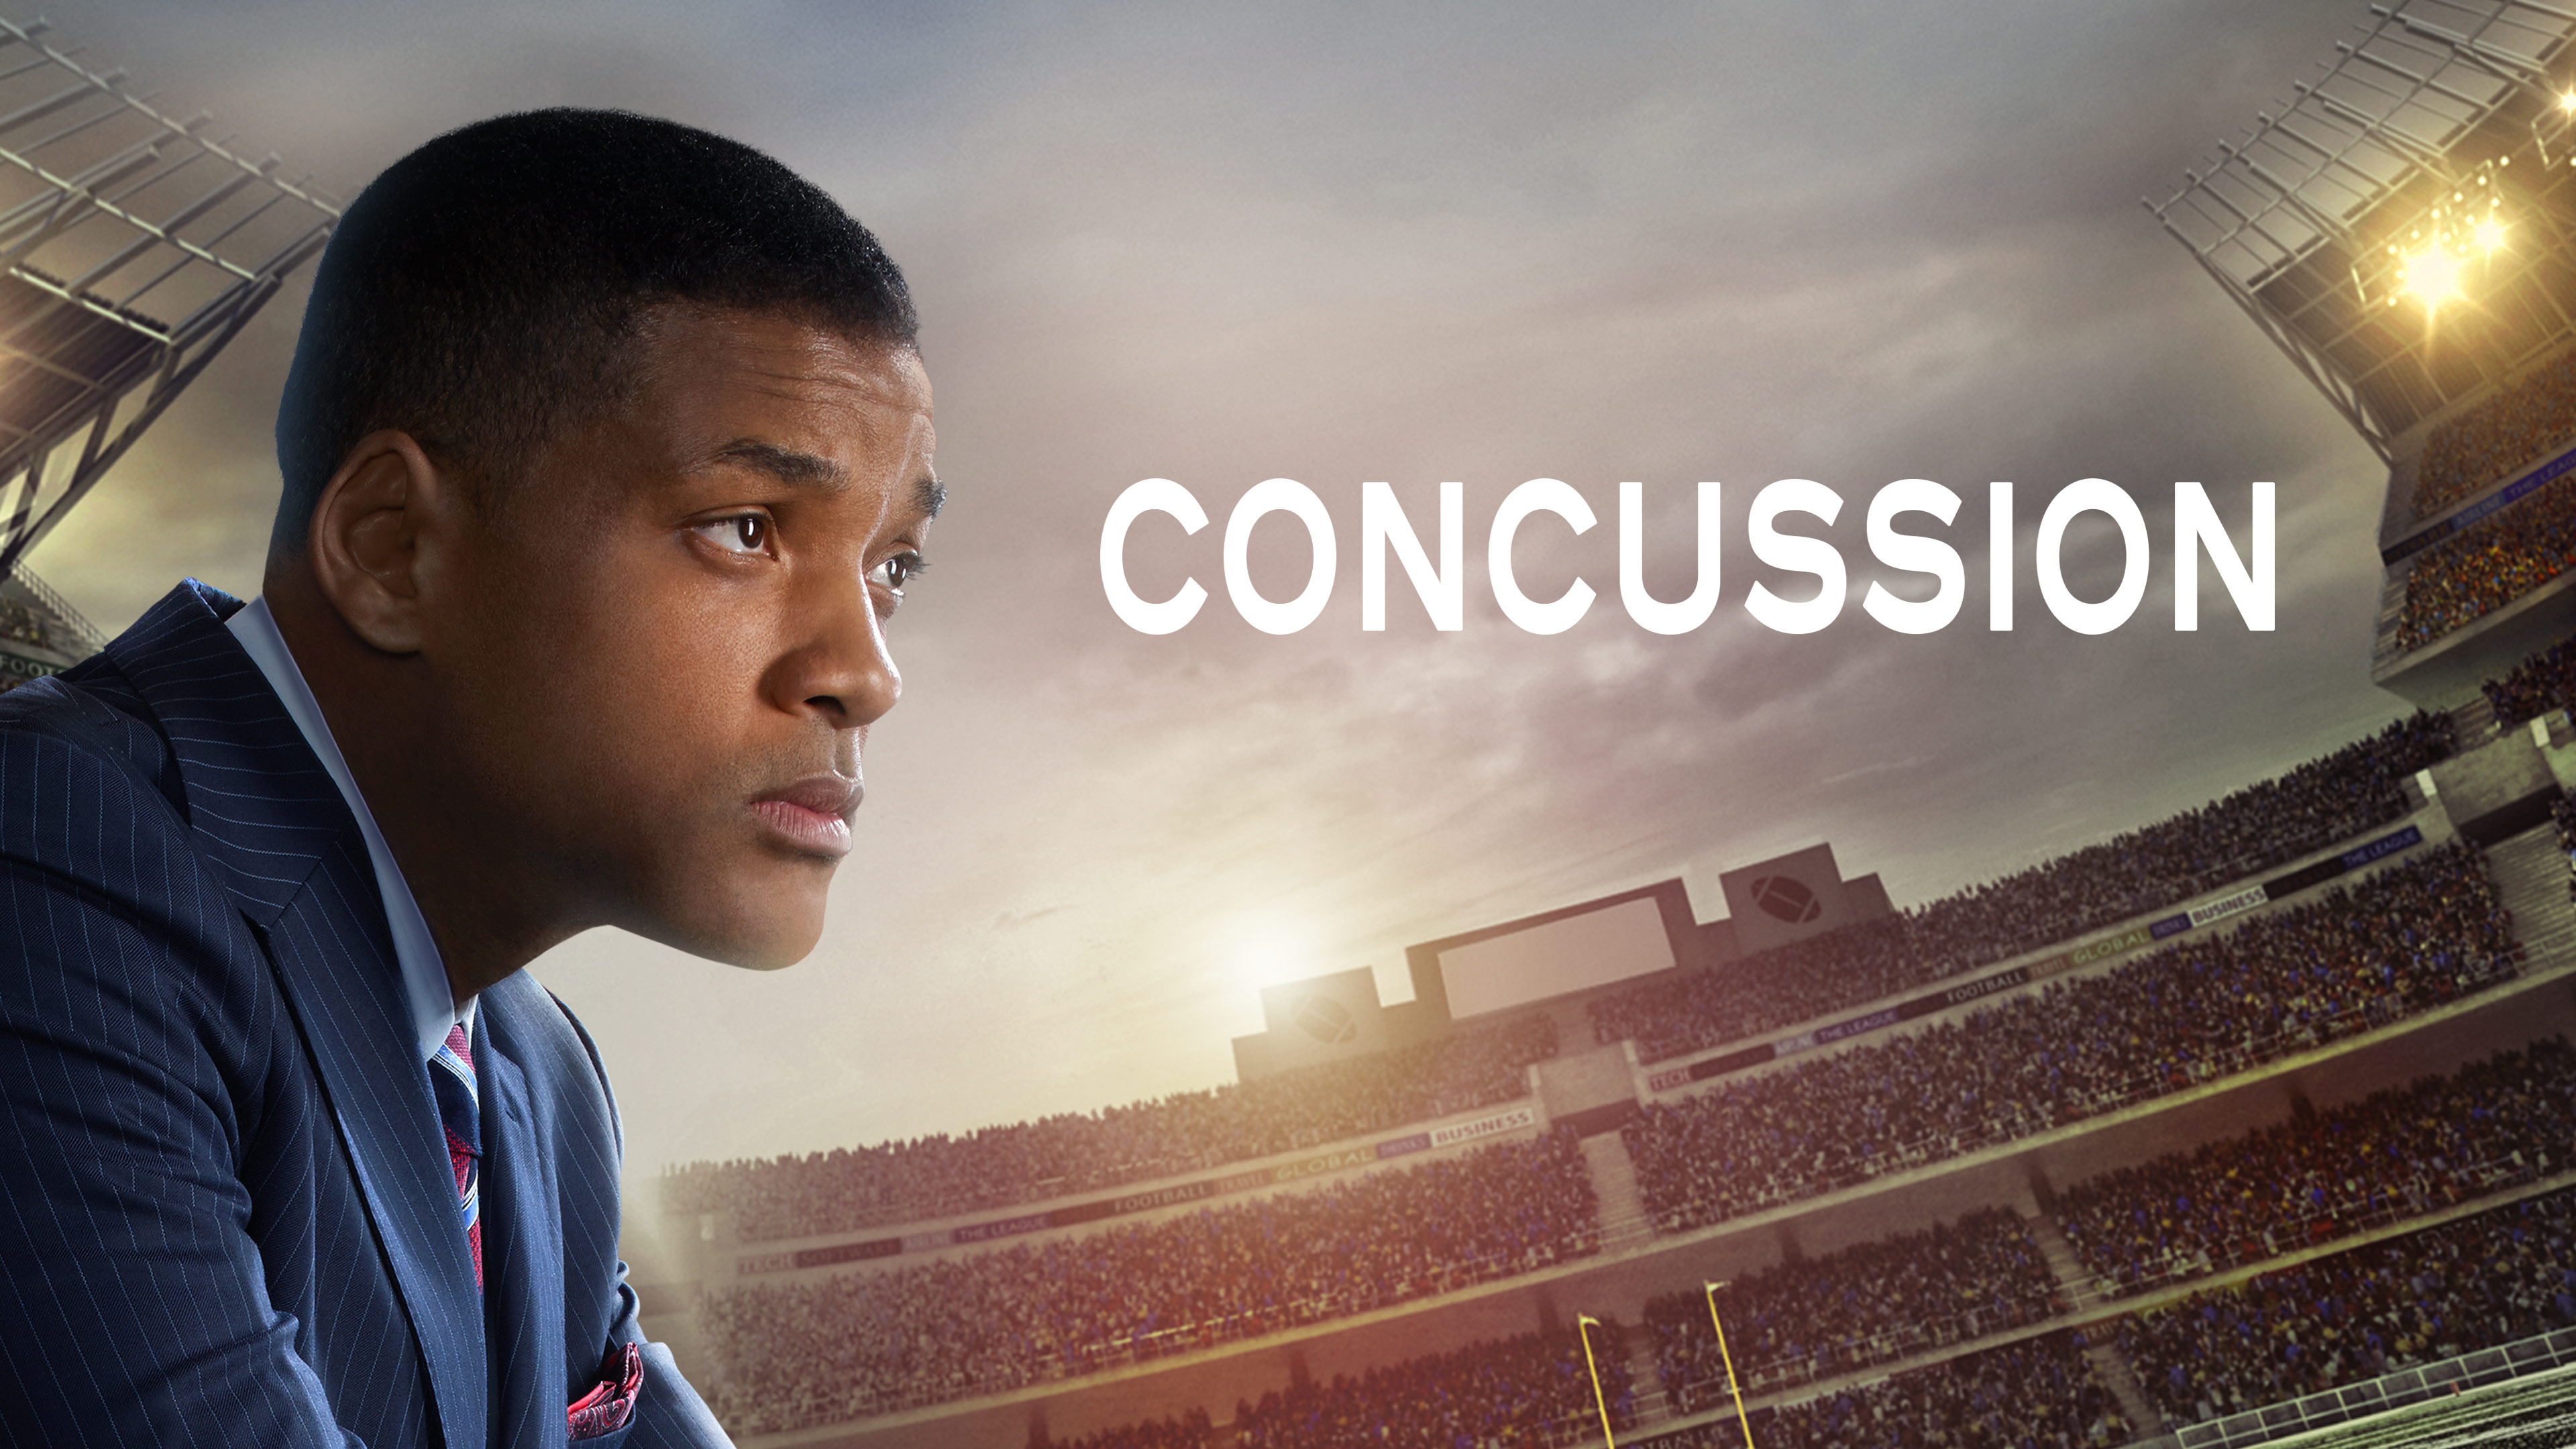 Watch Concussion Online | Stream Full Movies